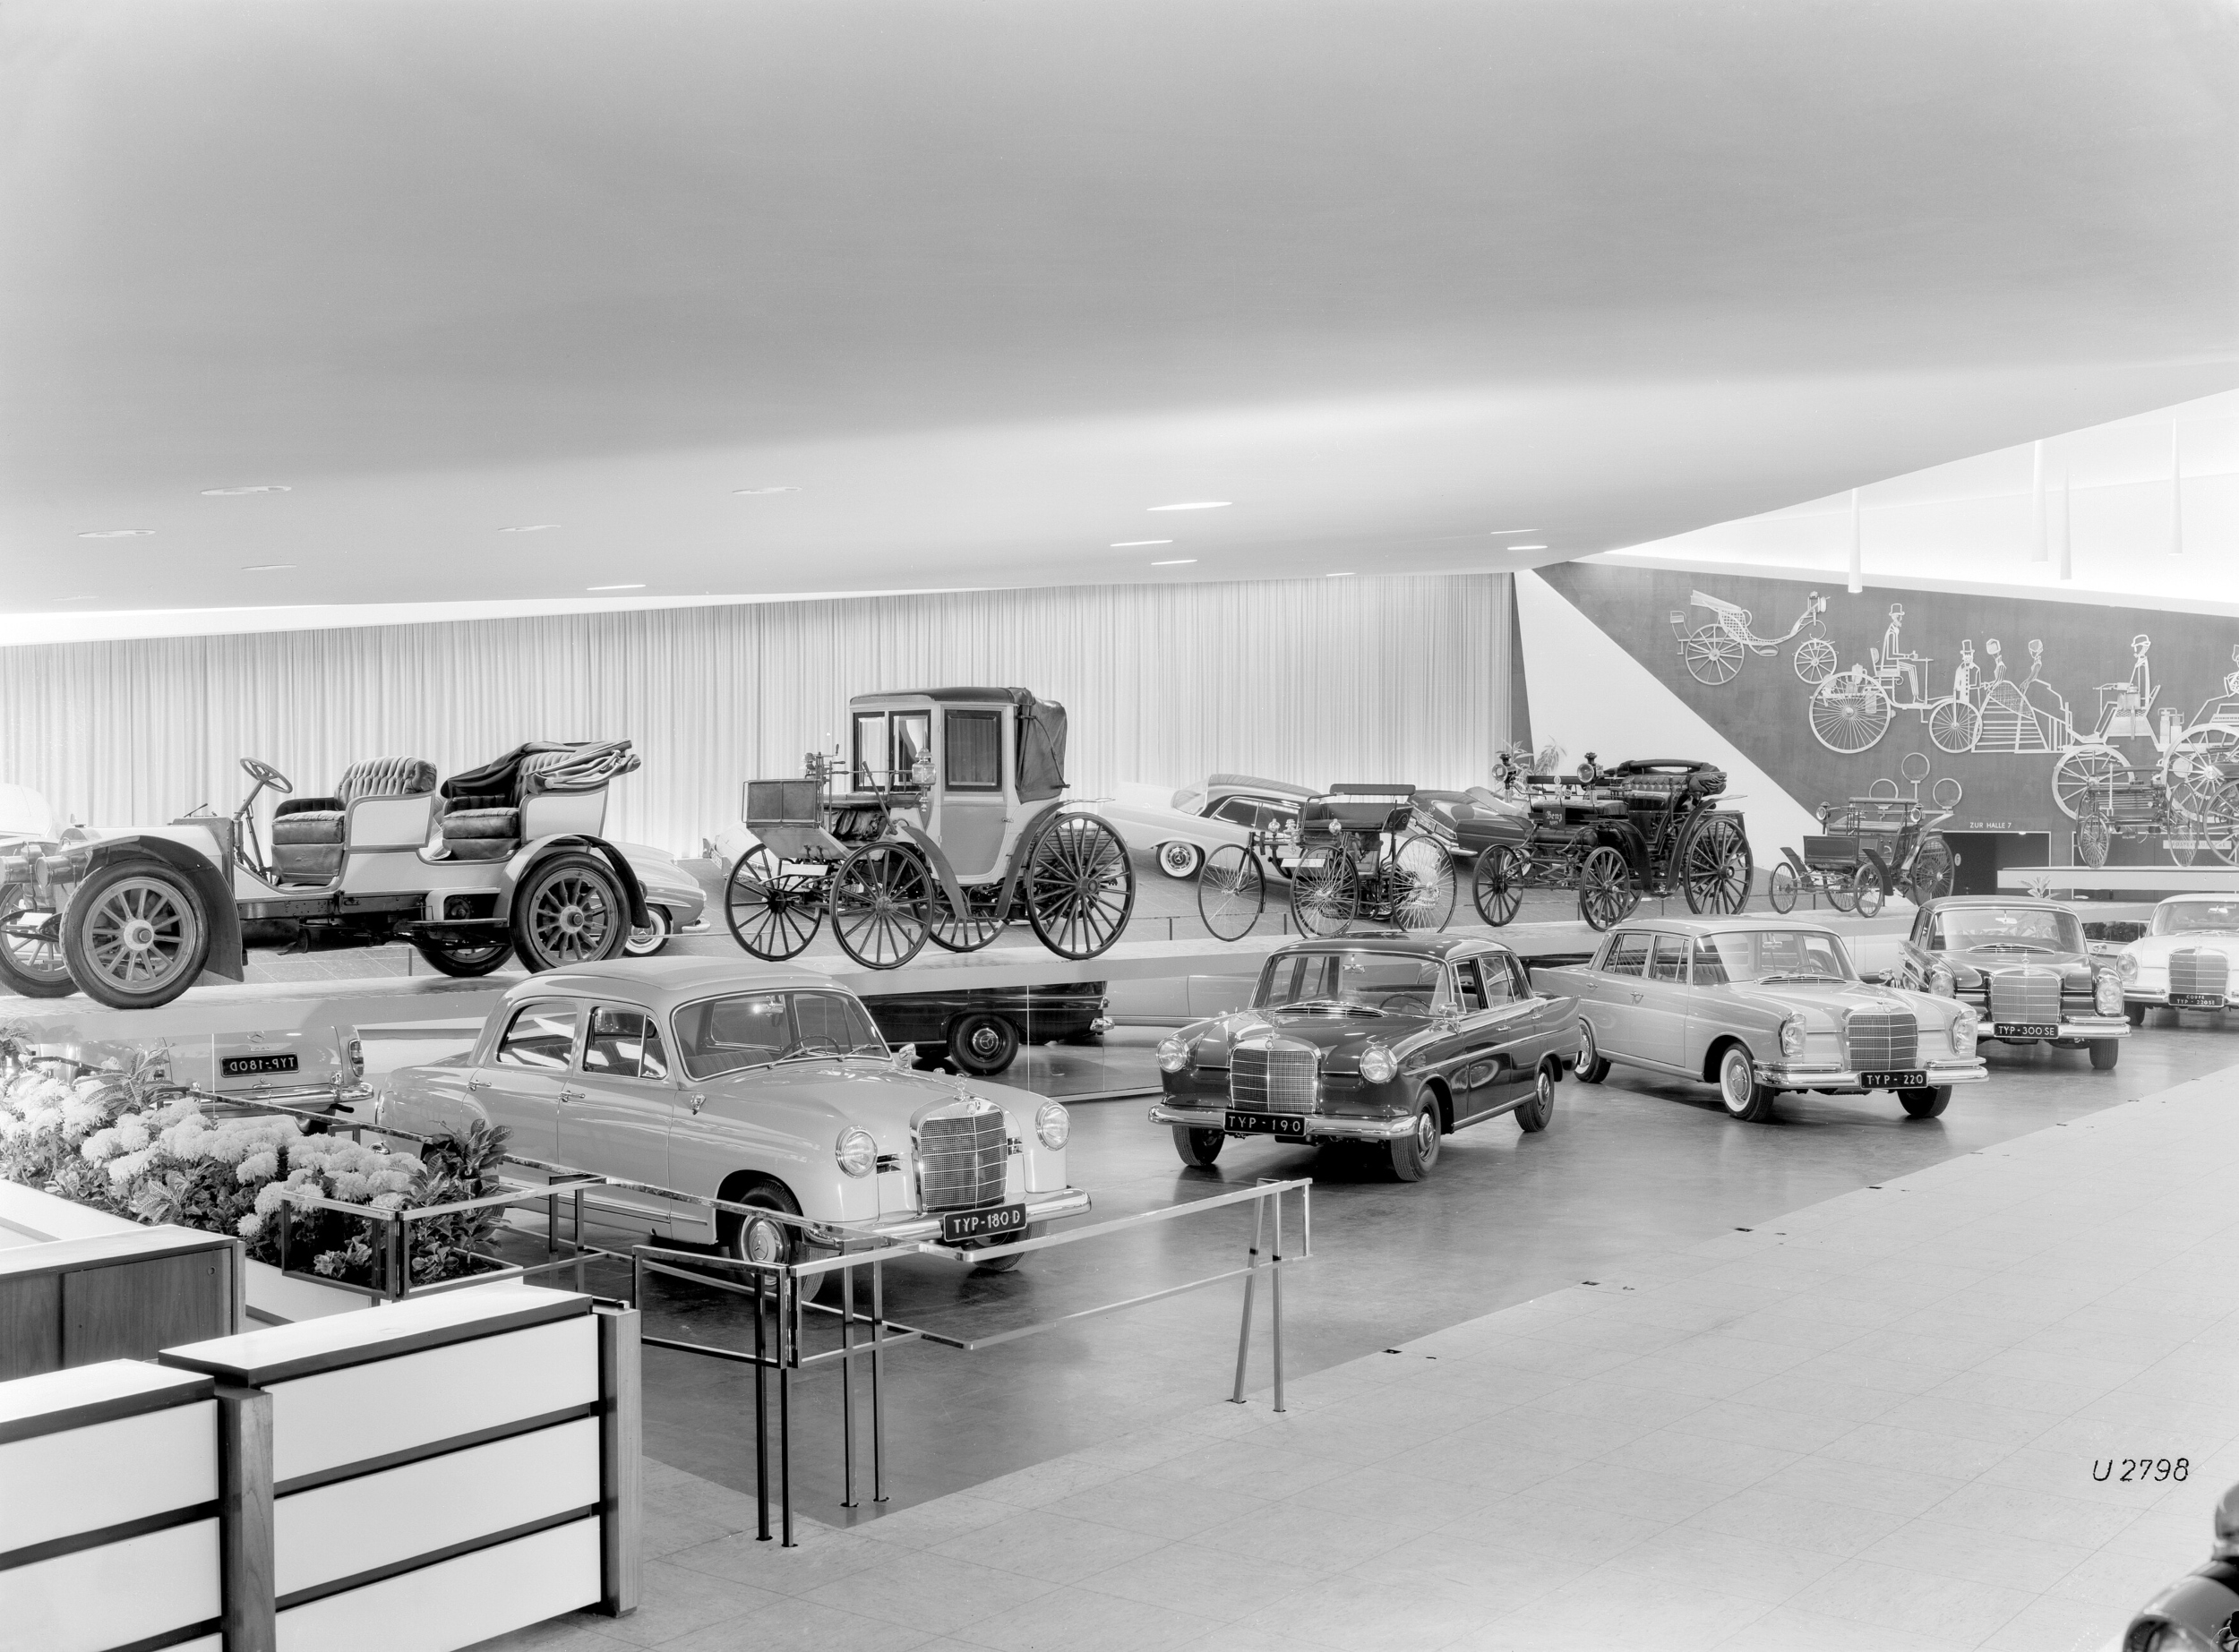 The Mercedes-Benz stand at the International Motor Show (IAA) in Frankfurt am Main, 21 September to 1 October 1961. Mercedes-Benz vehicles from front to back: 180 D (W 120), 190 (W 110, exhibition newcomer), 220 (W 111), 300 SE (W 112, exhibition newcomer) and 220 SE Coupé (W 111). (Photo signature in the Mercedes-Benz Classic archive: U2798)